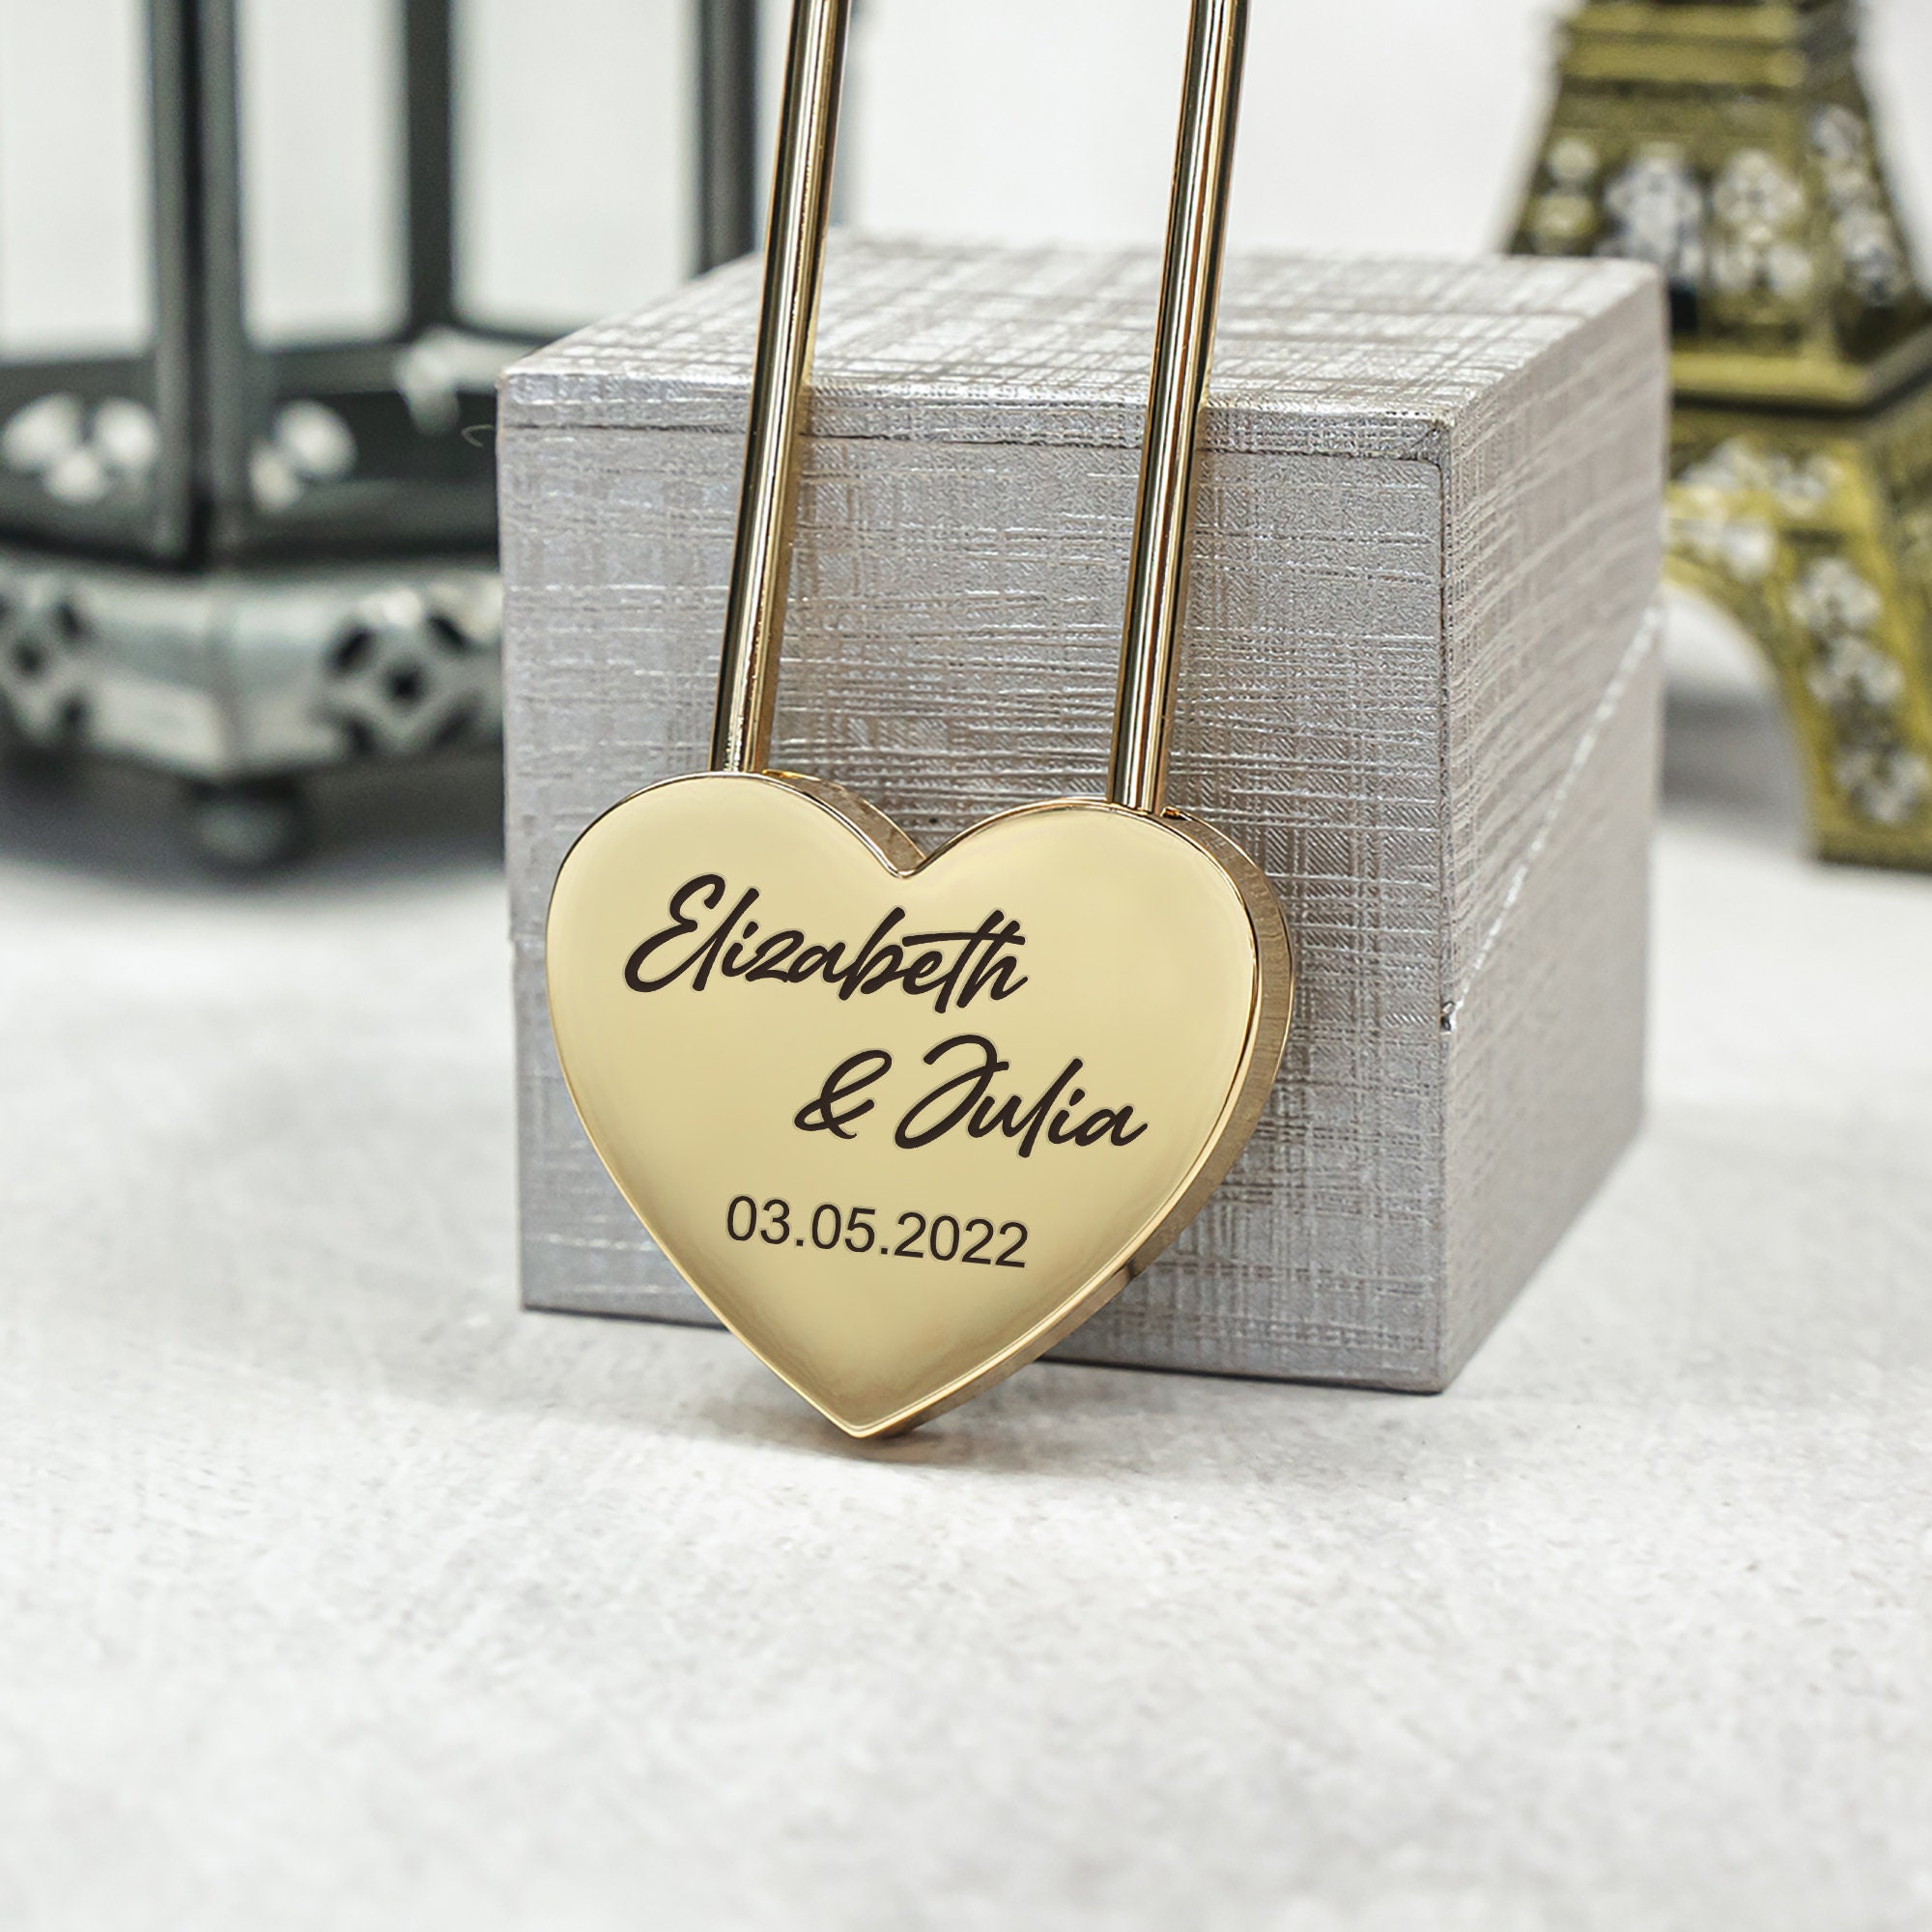 Key and Heart Shaped Padlock in Vintage Style by croisy